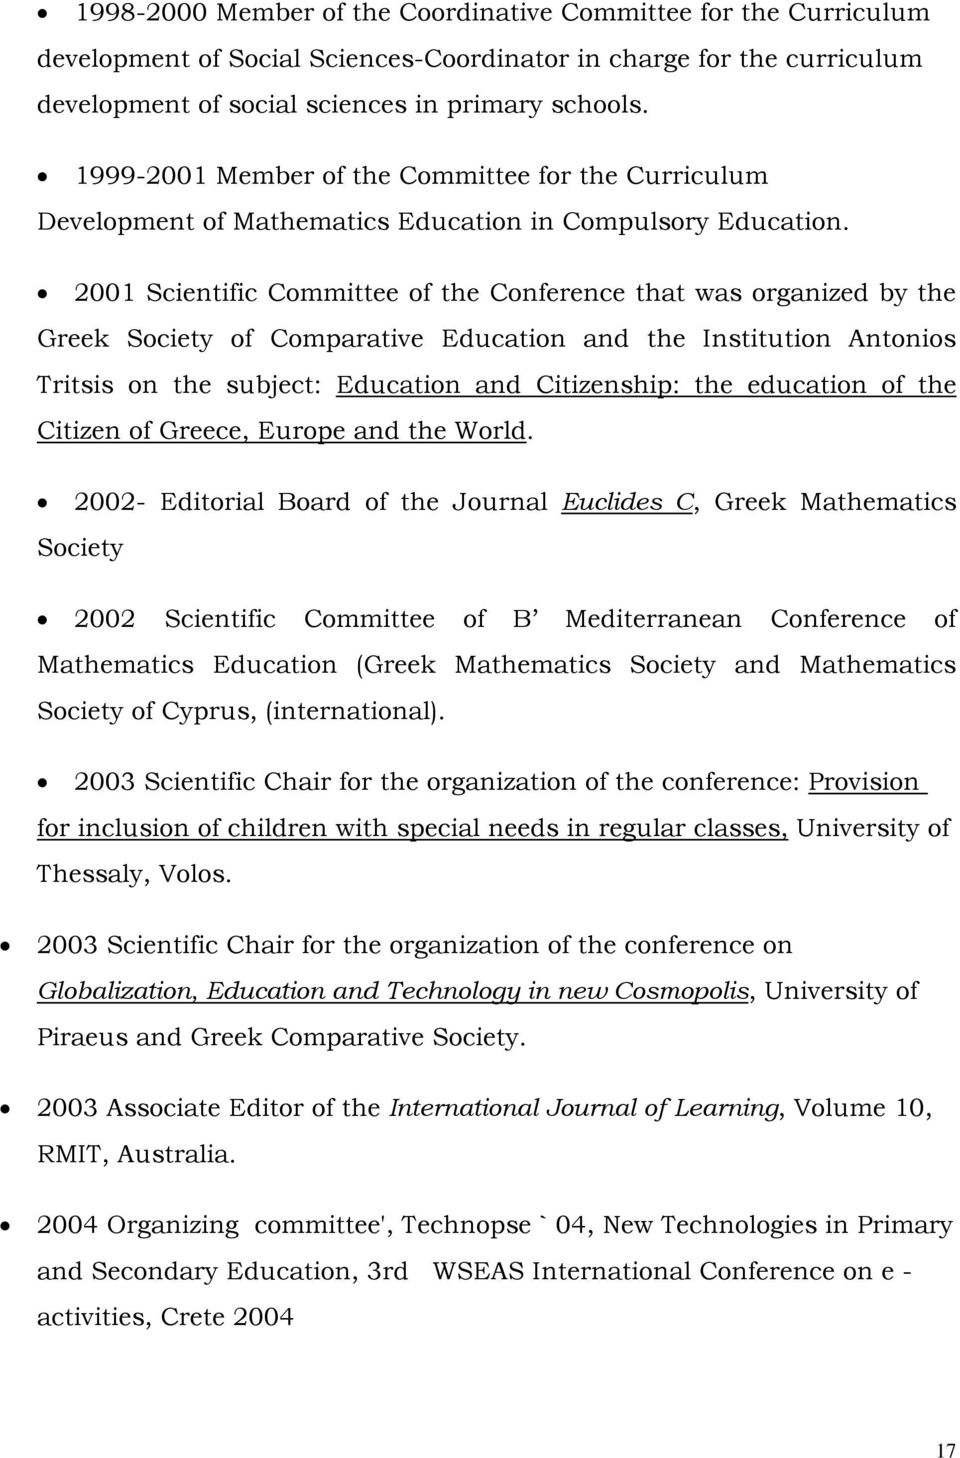 2001 Scientific Committee of the Conference that was organized by the Greek Society of Comparative Education and the Institution Antonios Tritsis on the subject: Education and Citizenship: the